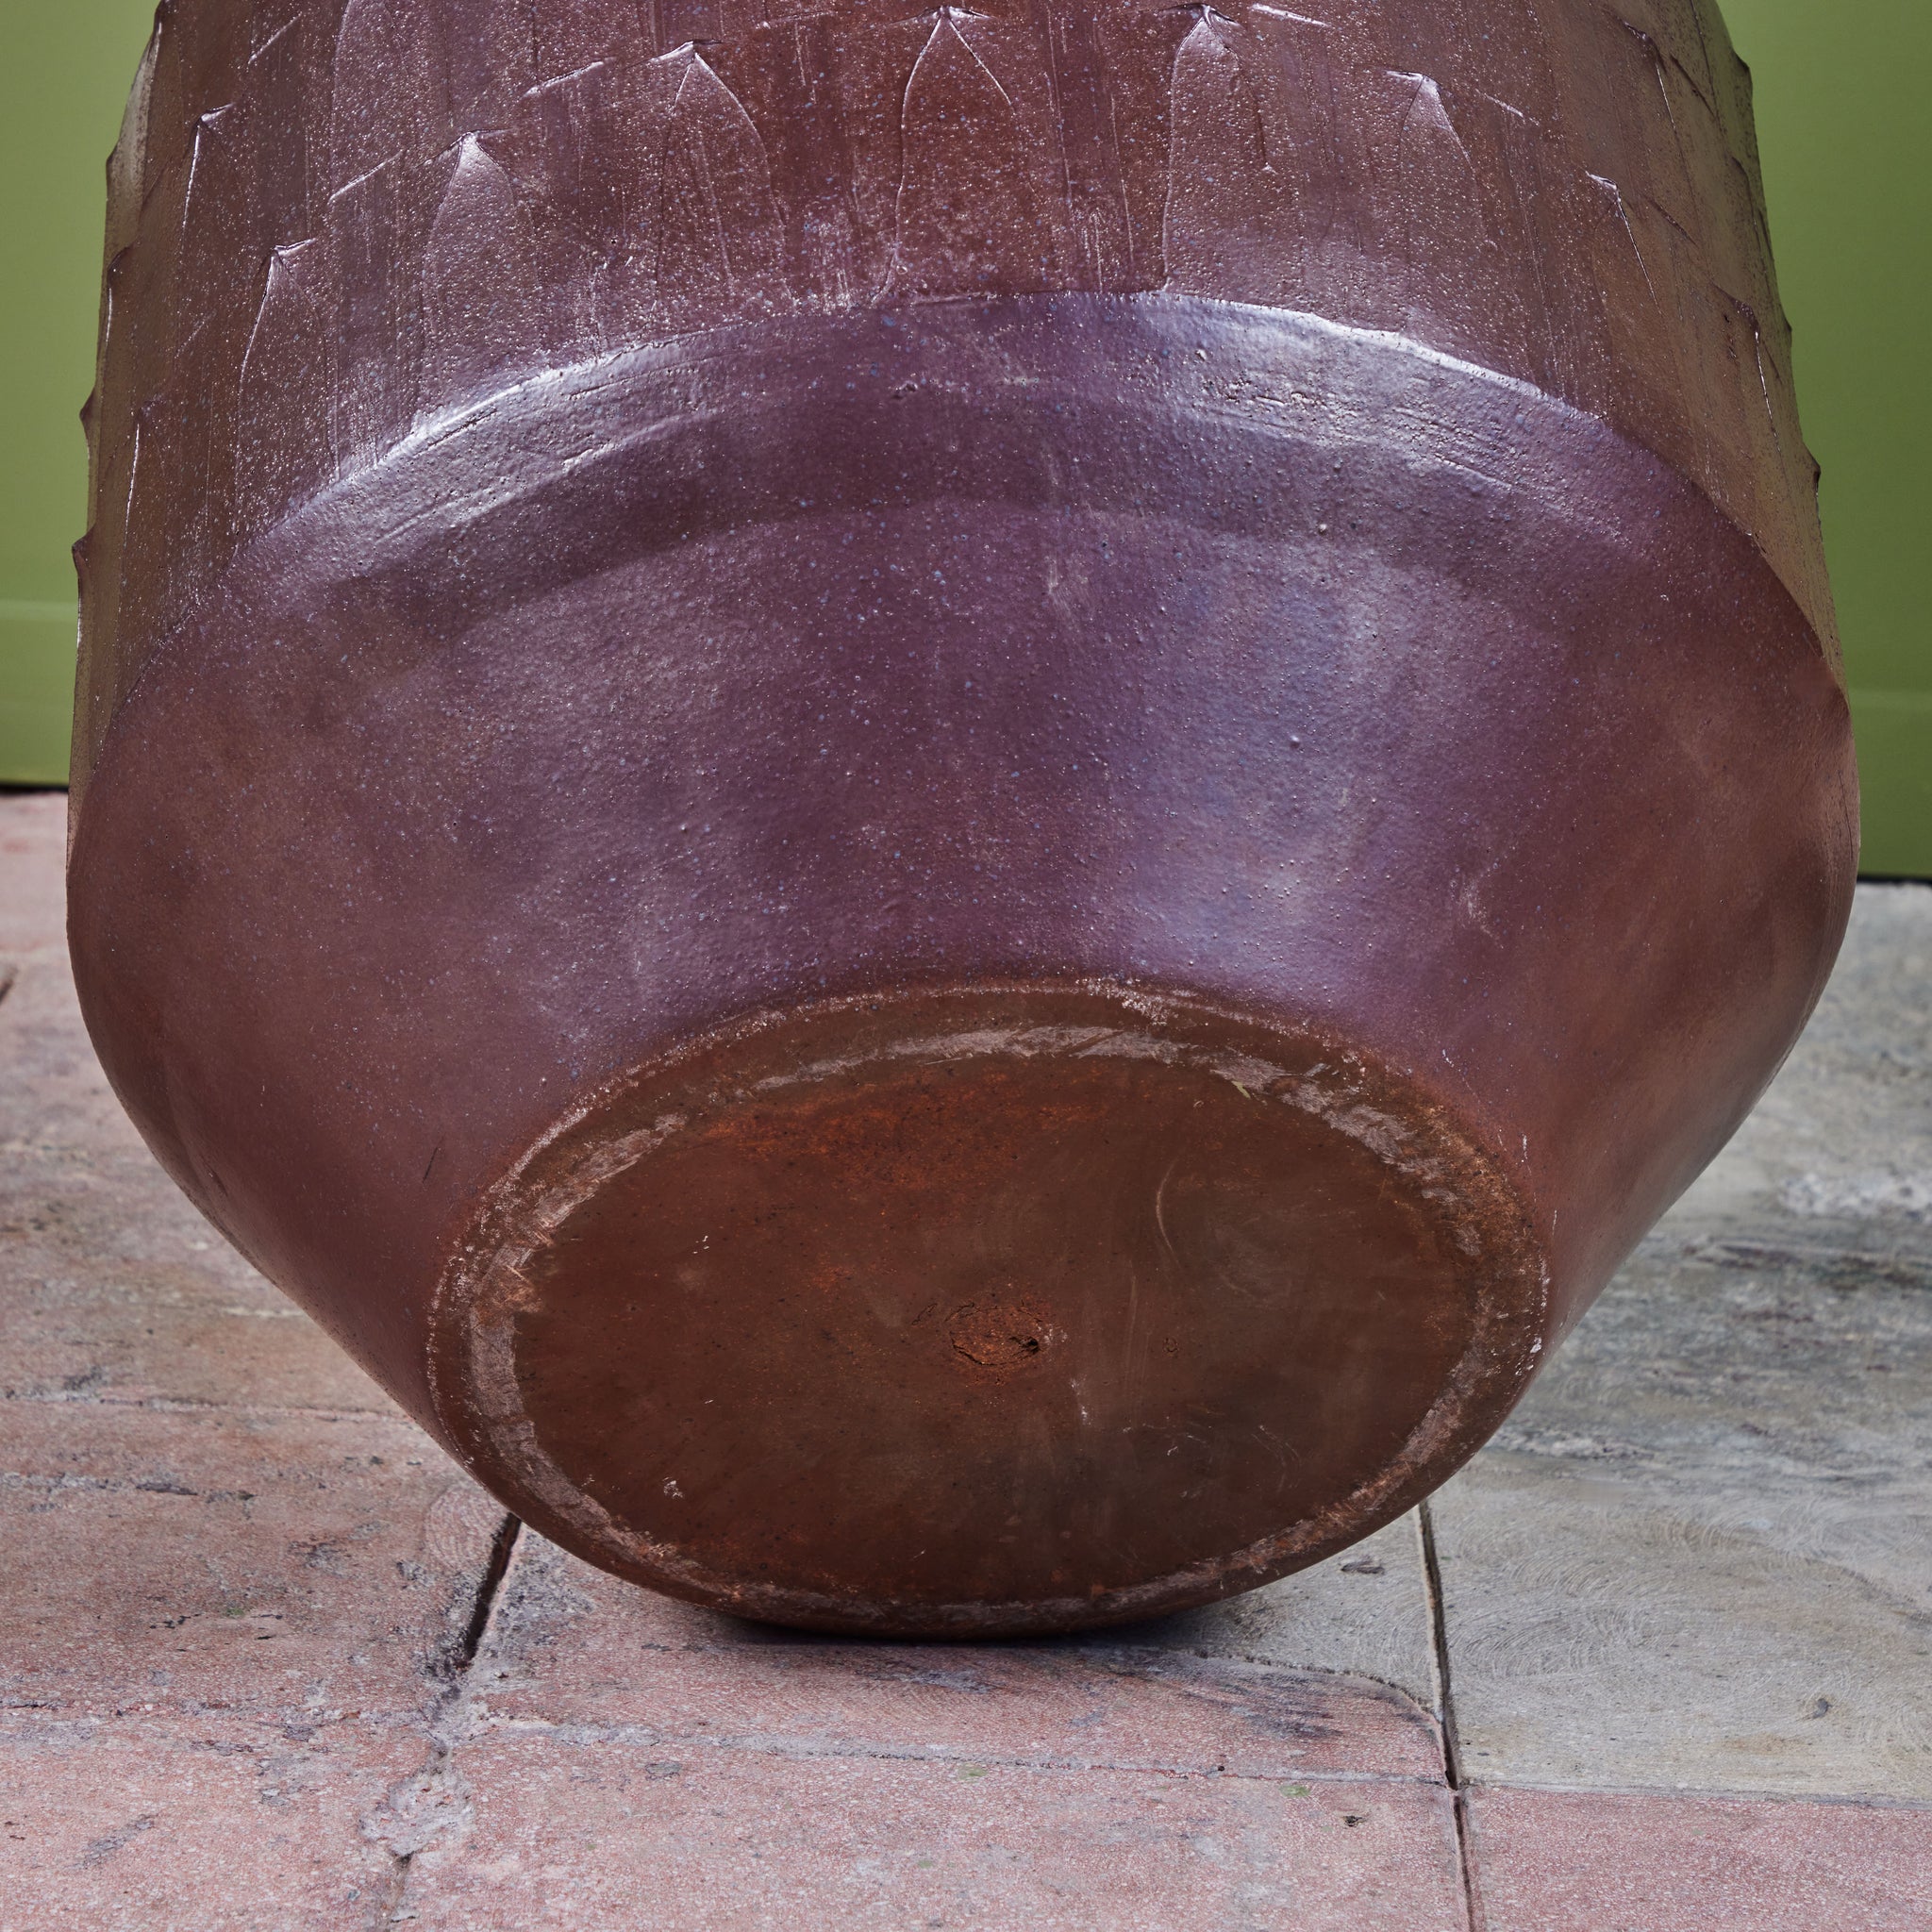 David Cressey Ribbed Plum Glazed Pro/Artisan Planter for Architectural Pottery